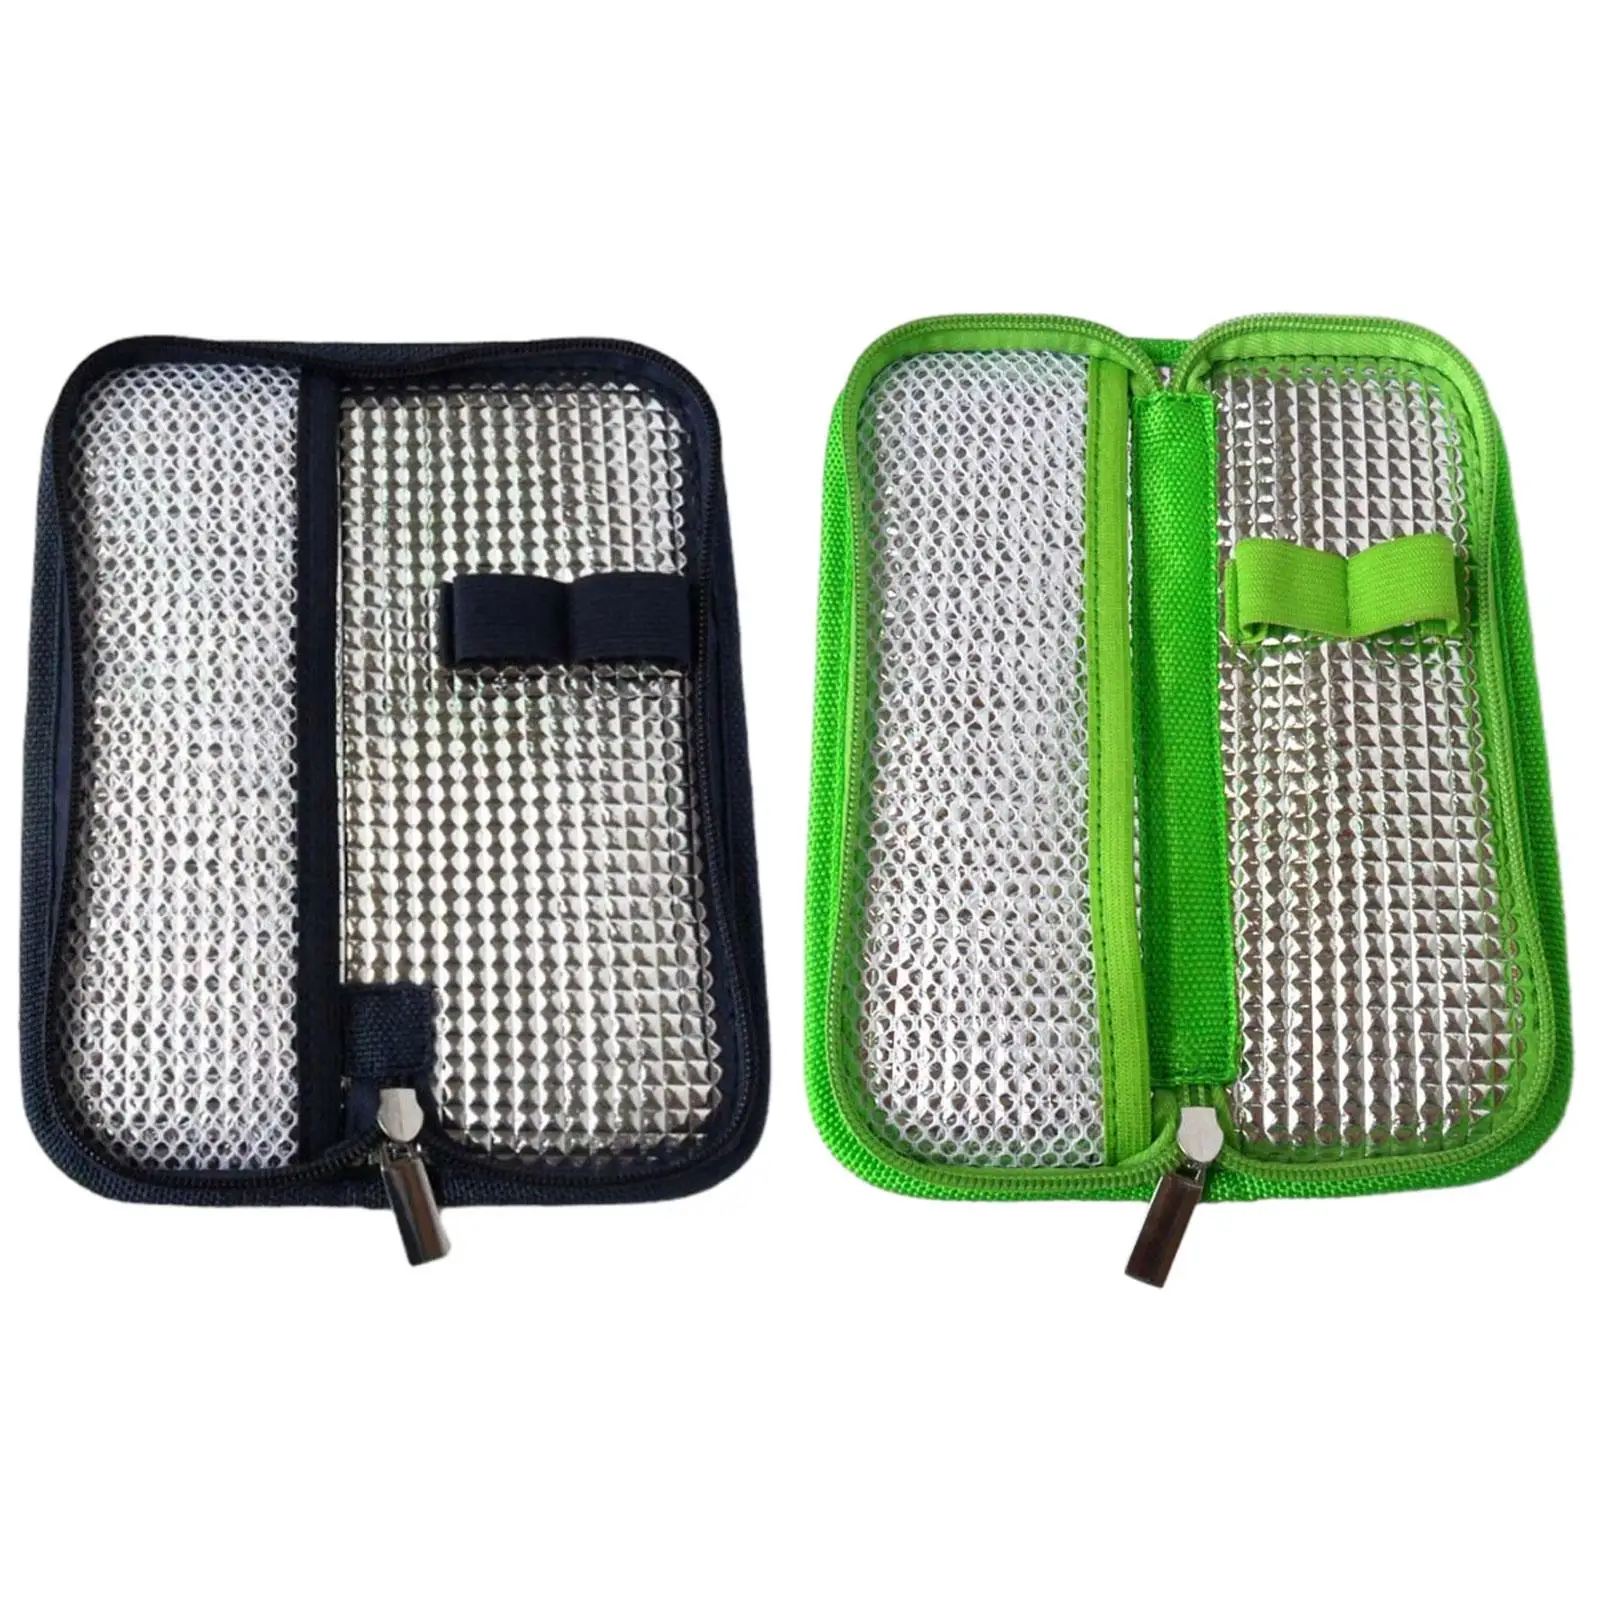 Insulation Cooling Bag Aluminum Foil Insulation Lining Outdoor Carrying Bag